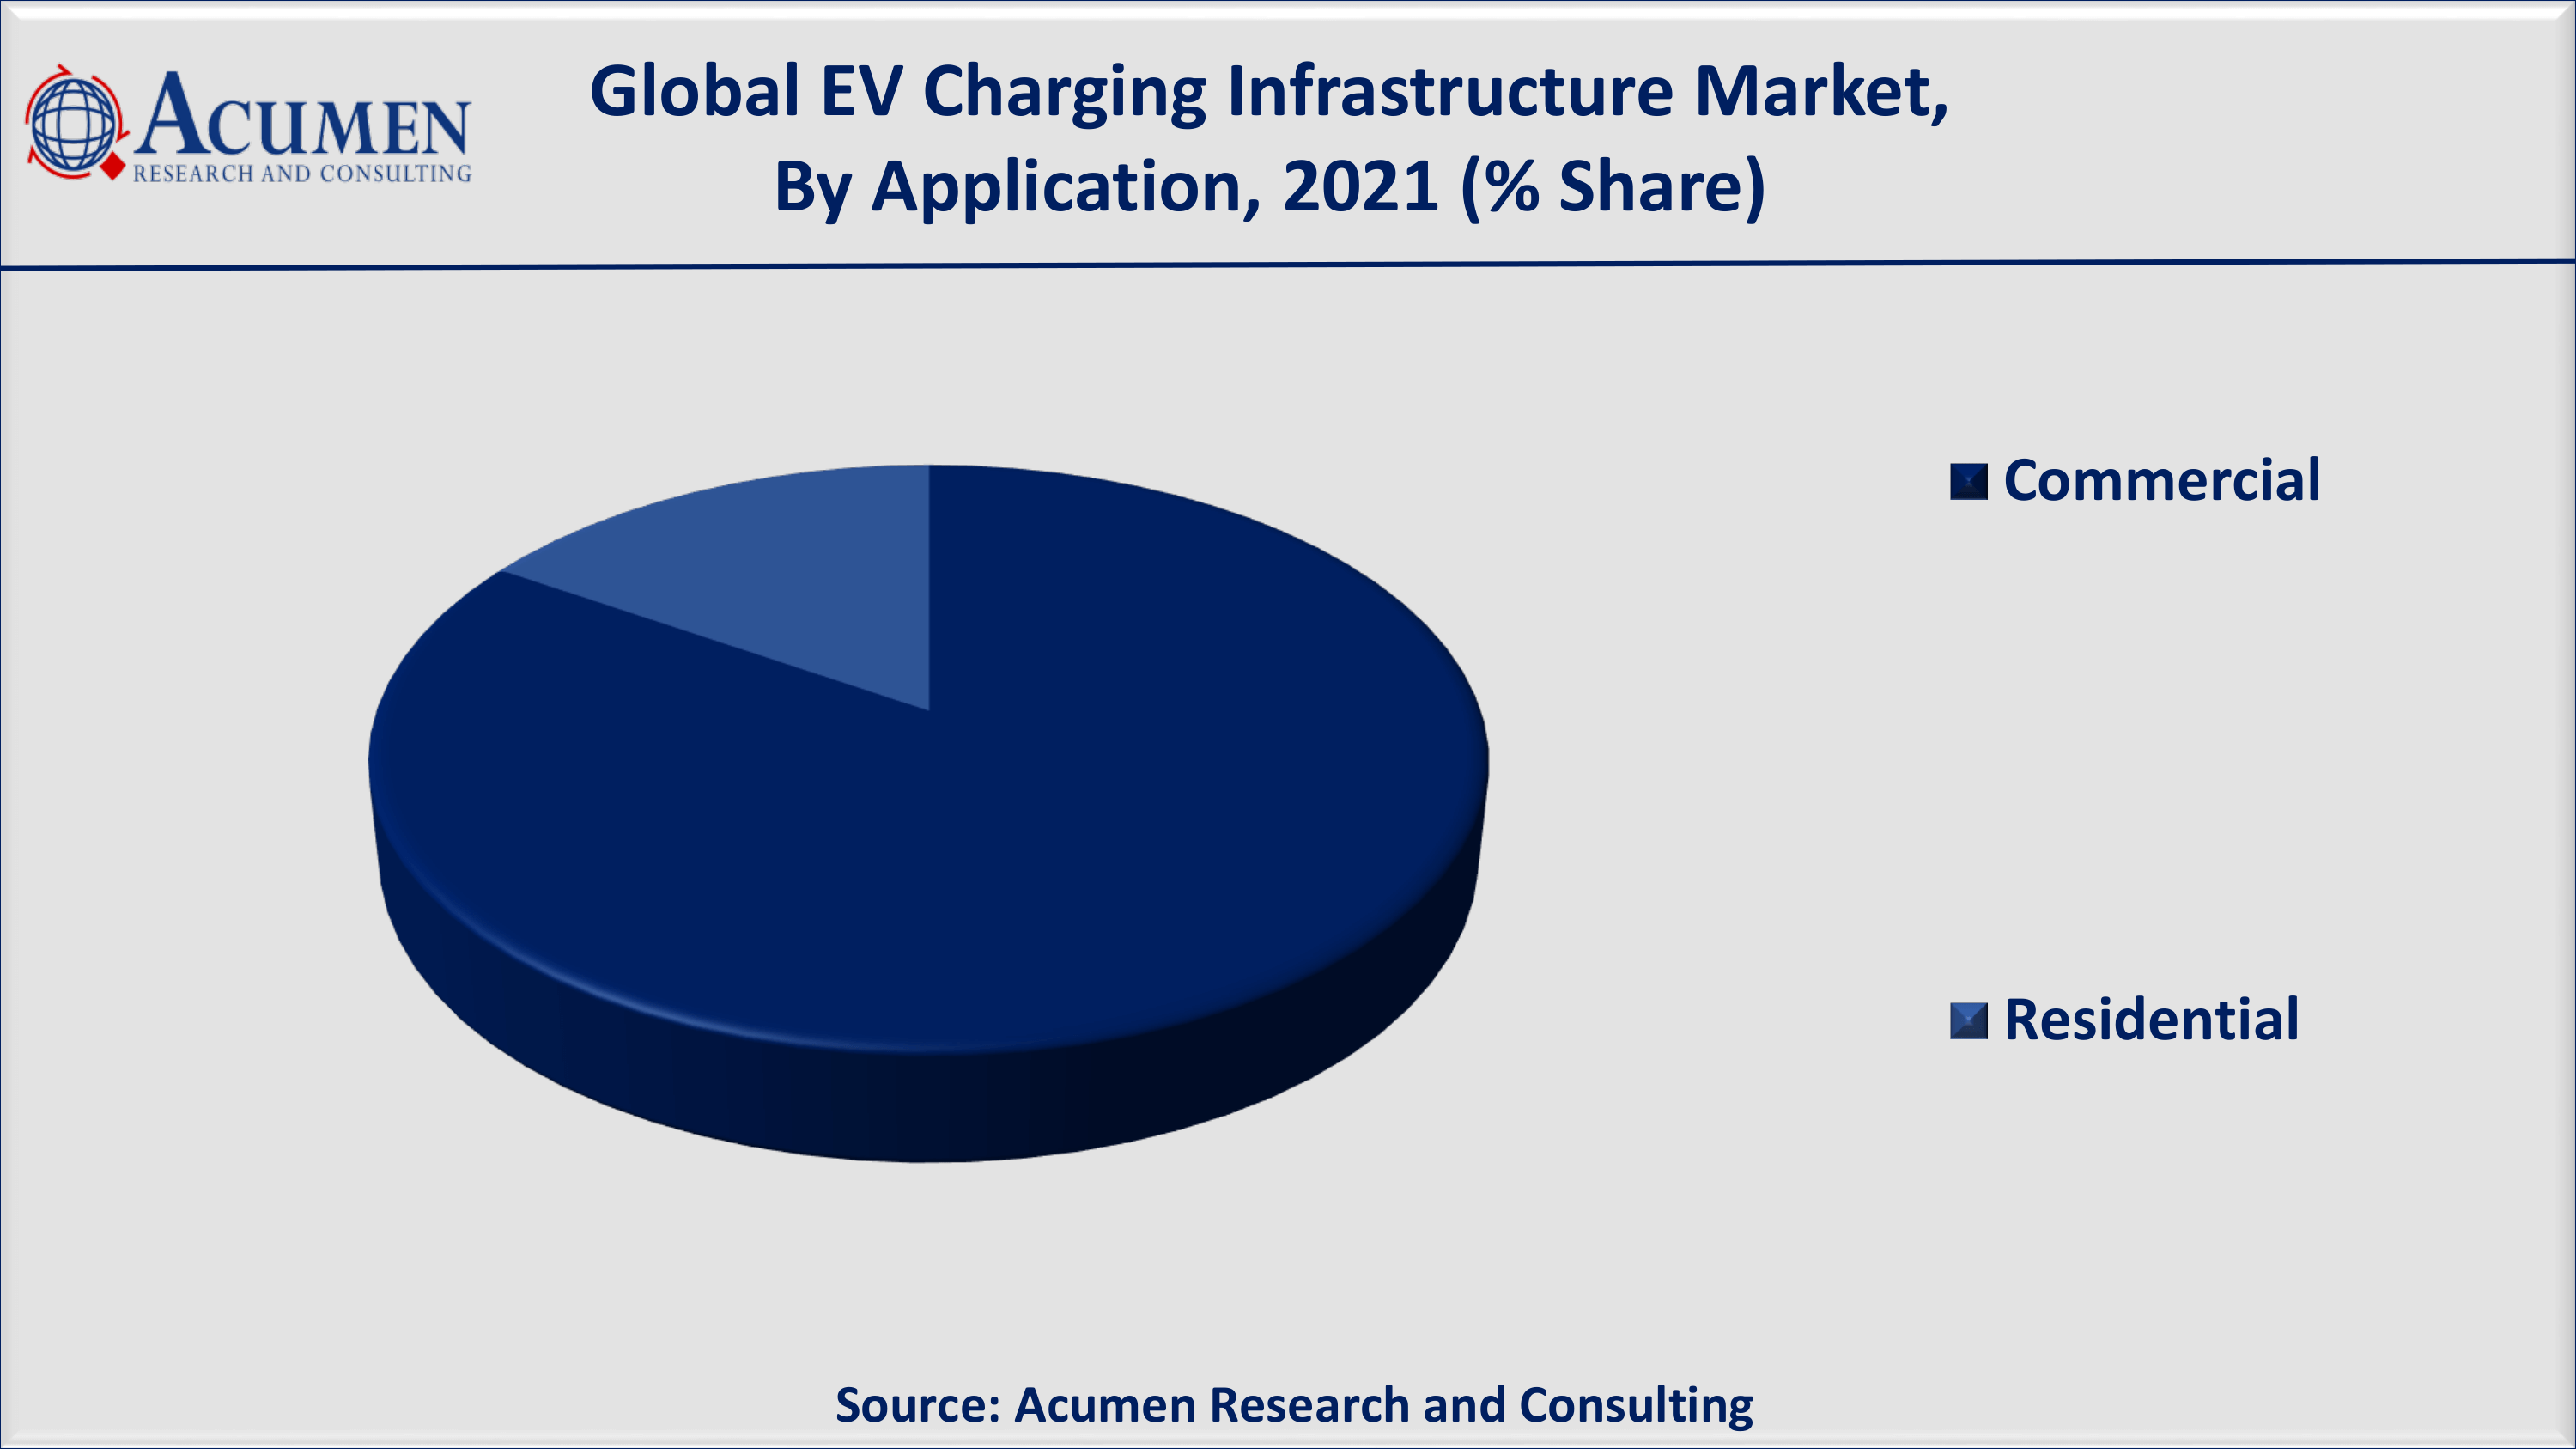 Development of EV charging stations fuels the global electric vehicle charging infrastructure market value